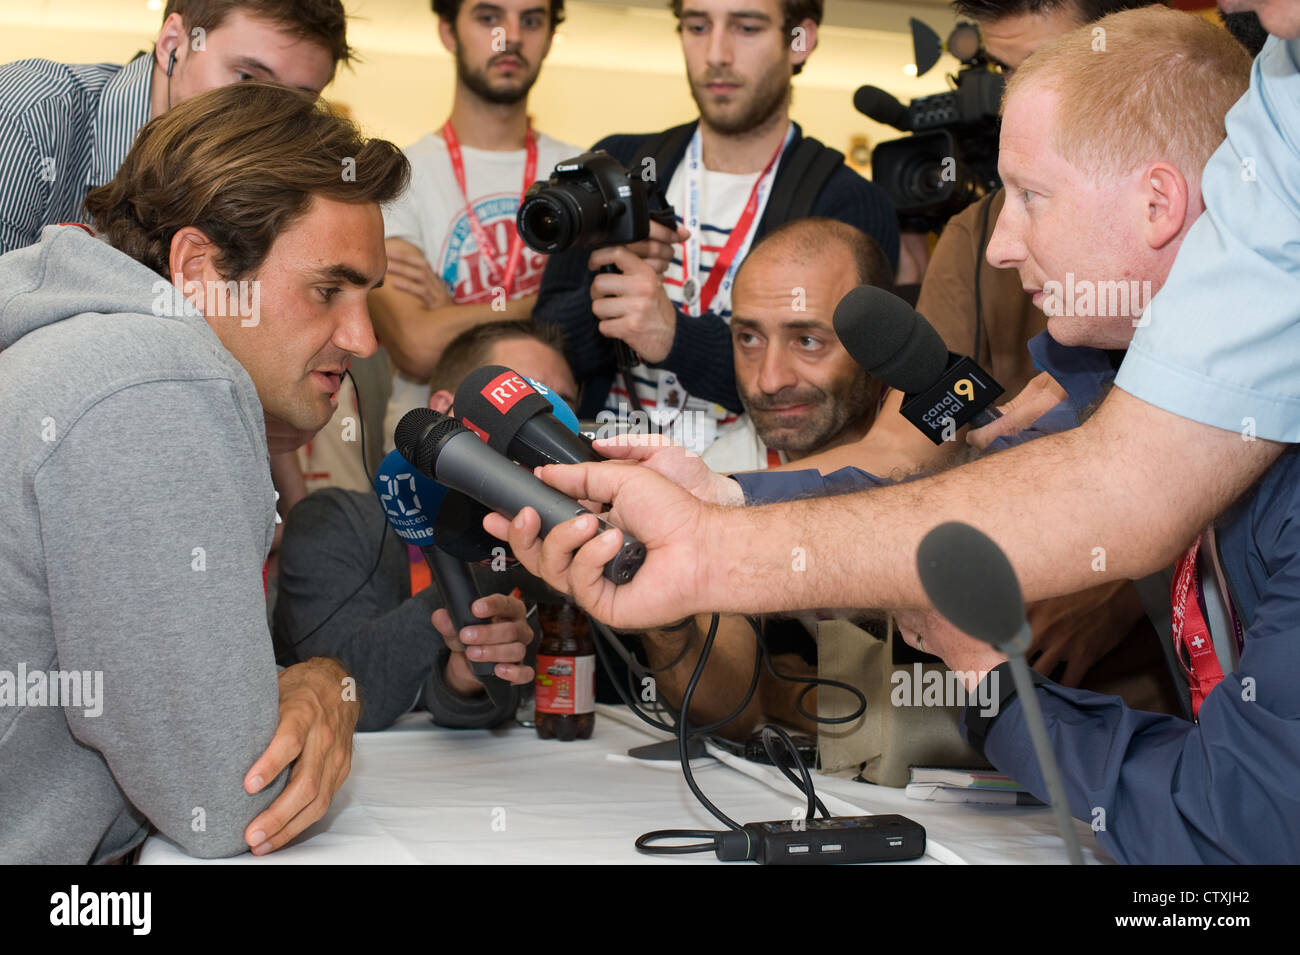 London, August 5, 2012. Tennis player Roger Federer gives a press conference at the Swiss Olympic headquarters Stock Photo